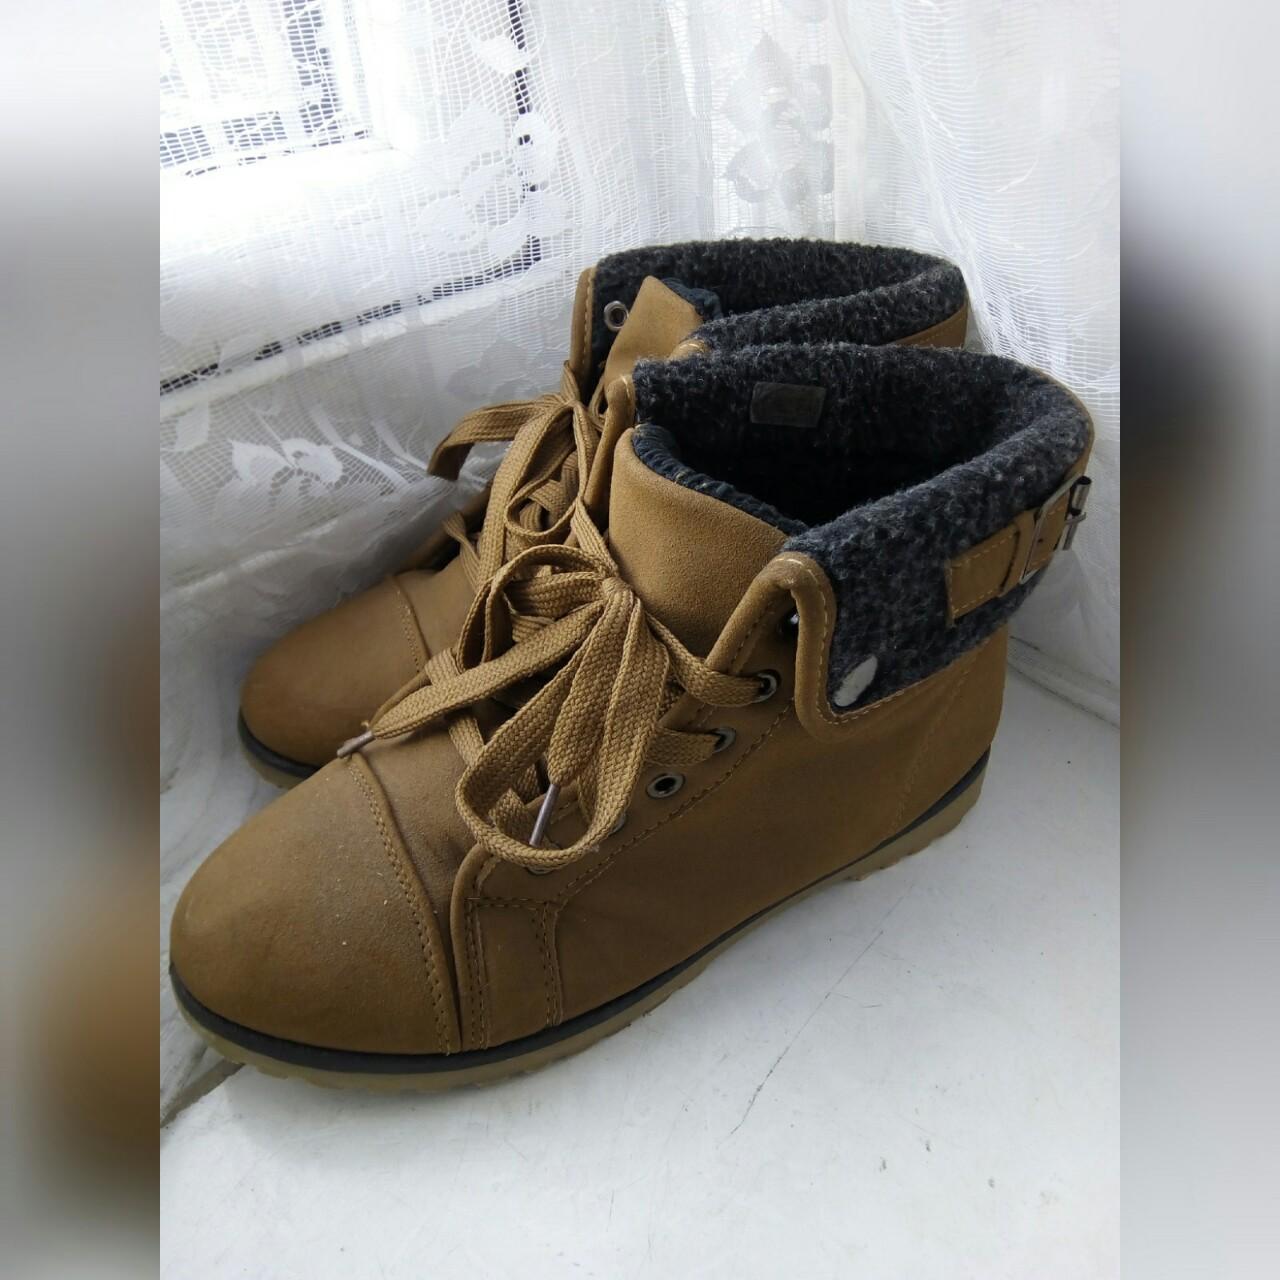 LITTLE BROWN BOOTS • Little brown boots, in the... - Depop